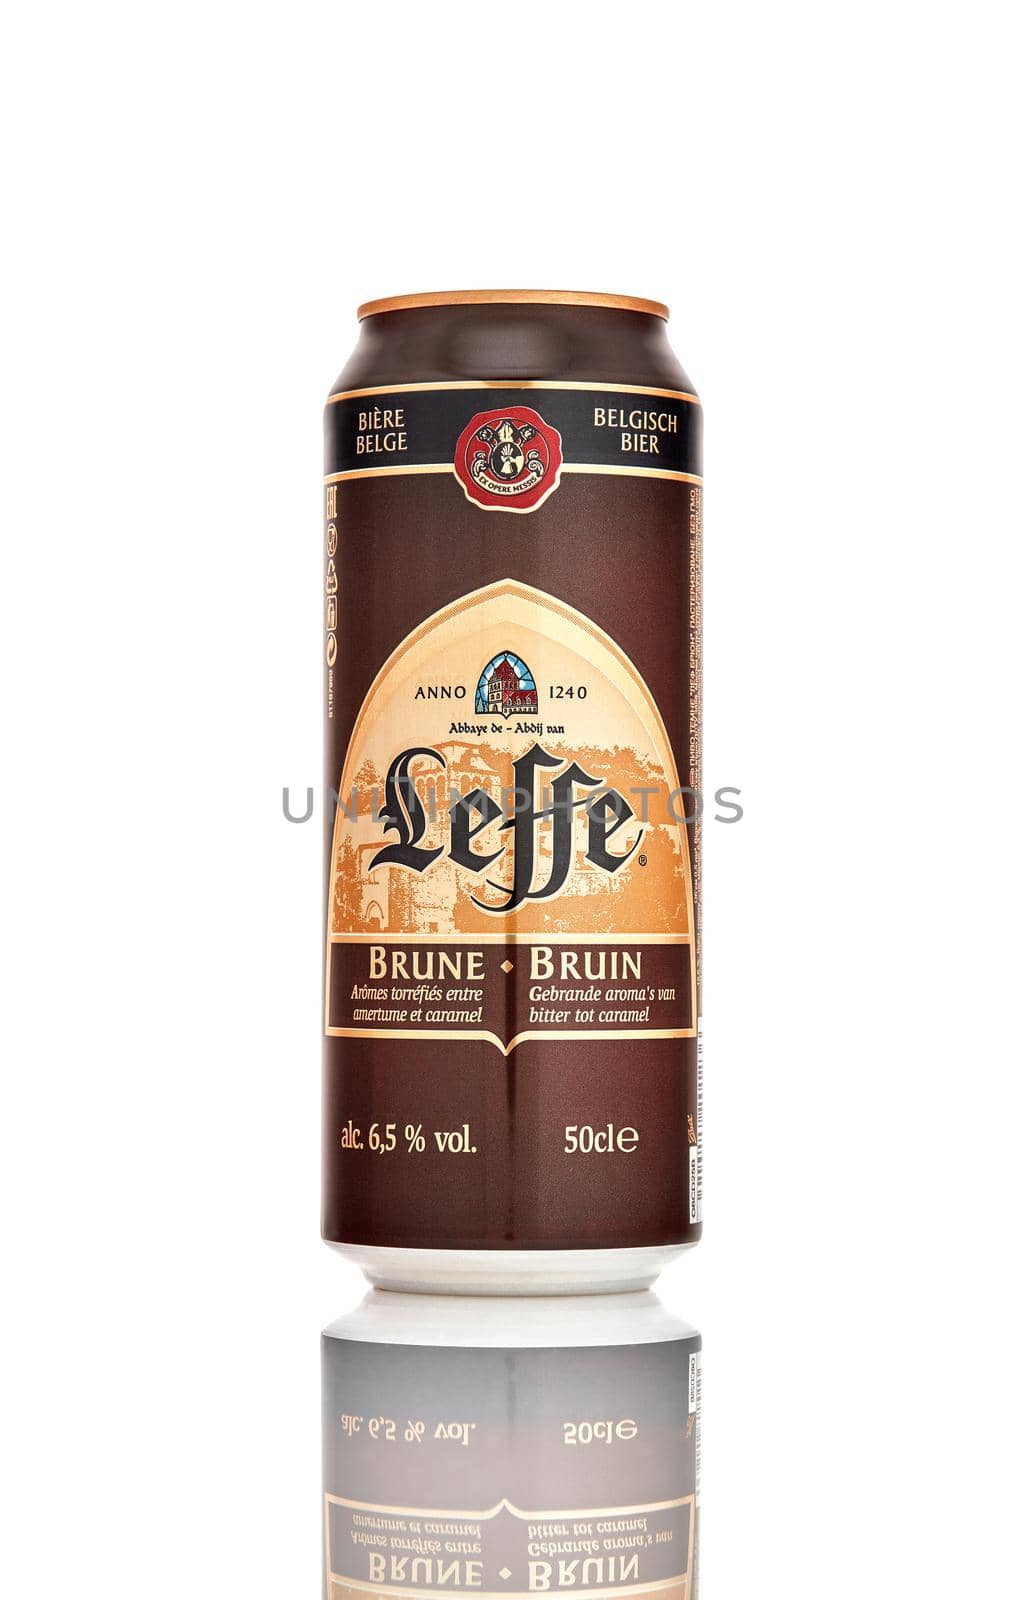 Aluminium can of Leffe Brune beer on white background. Leffe is a beer brand owned by InBev Belgium marketed as Abbey beer. 21.06.2019, Rostov-on-Don, Russia.